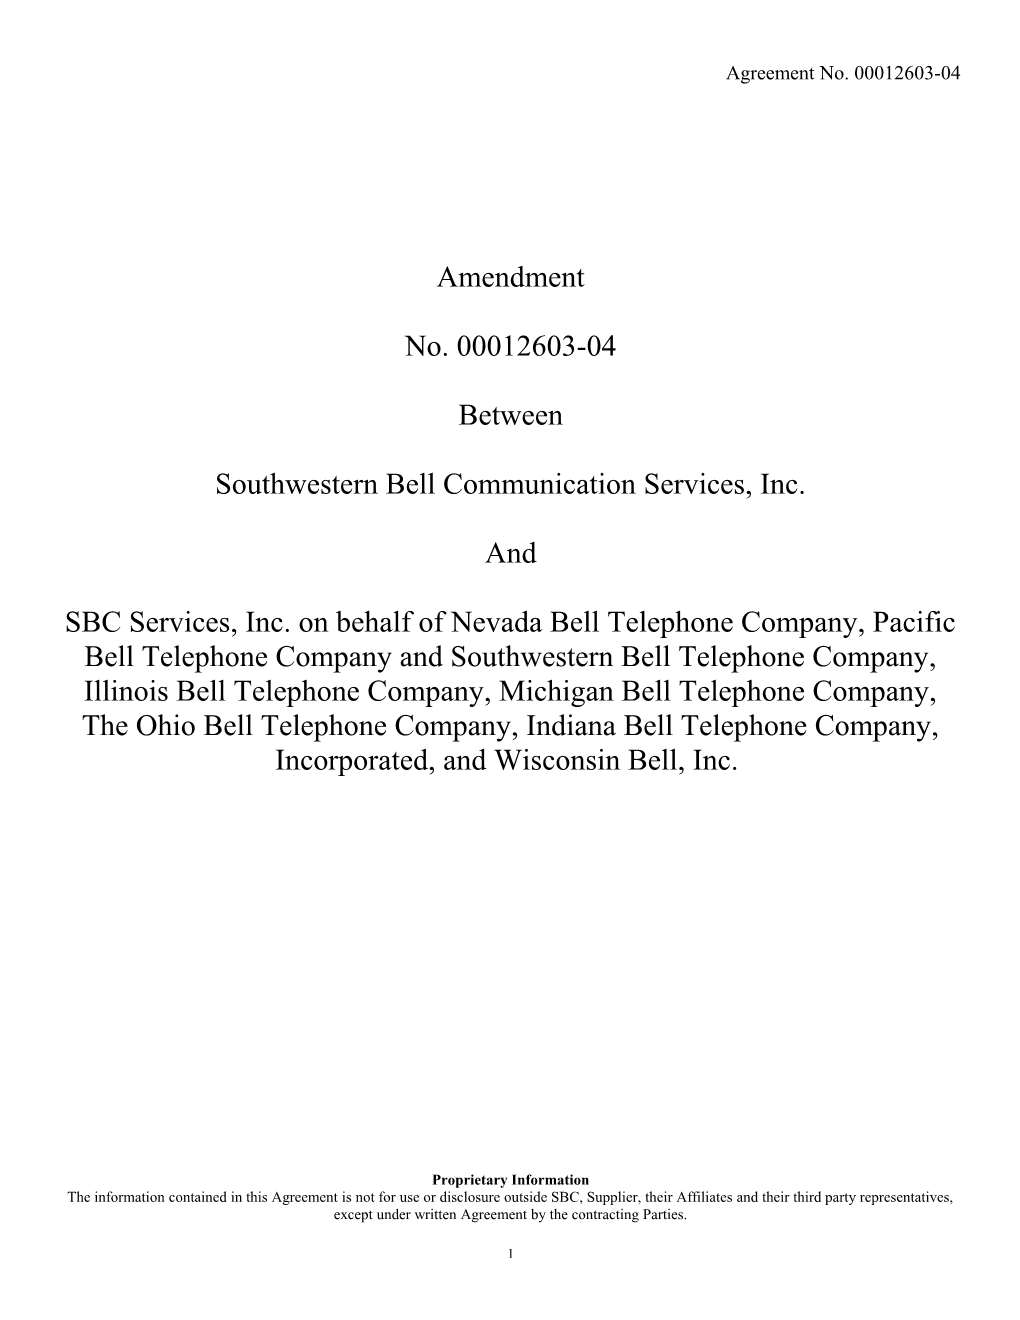 Southwestern Bell Communication Services, Inc